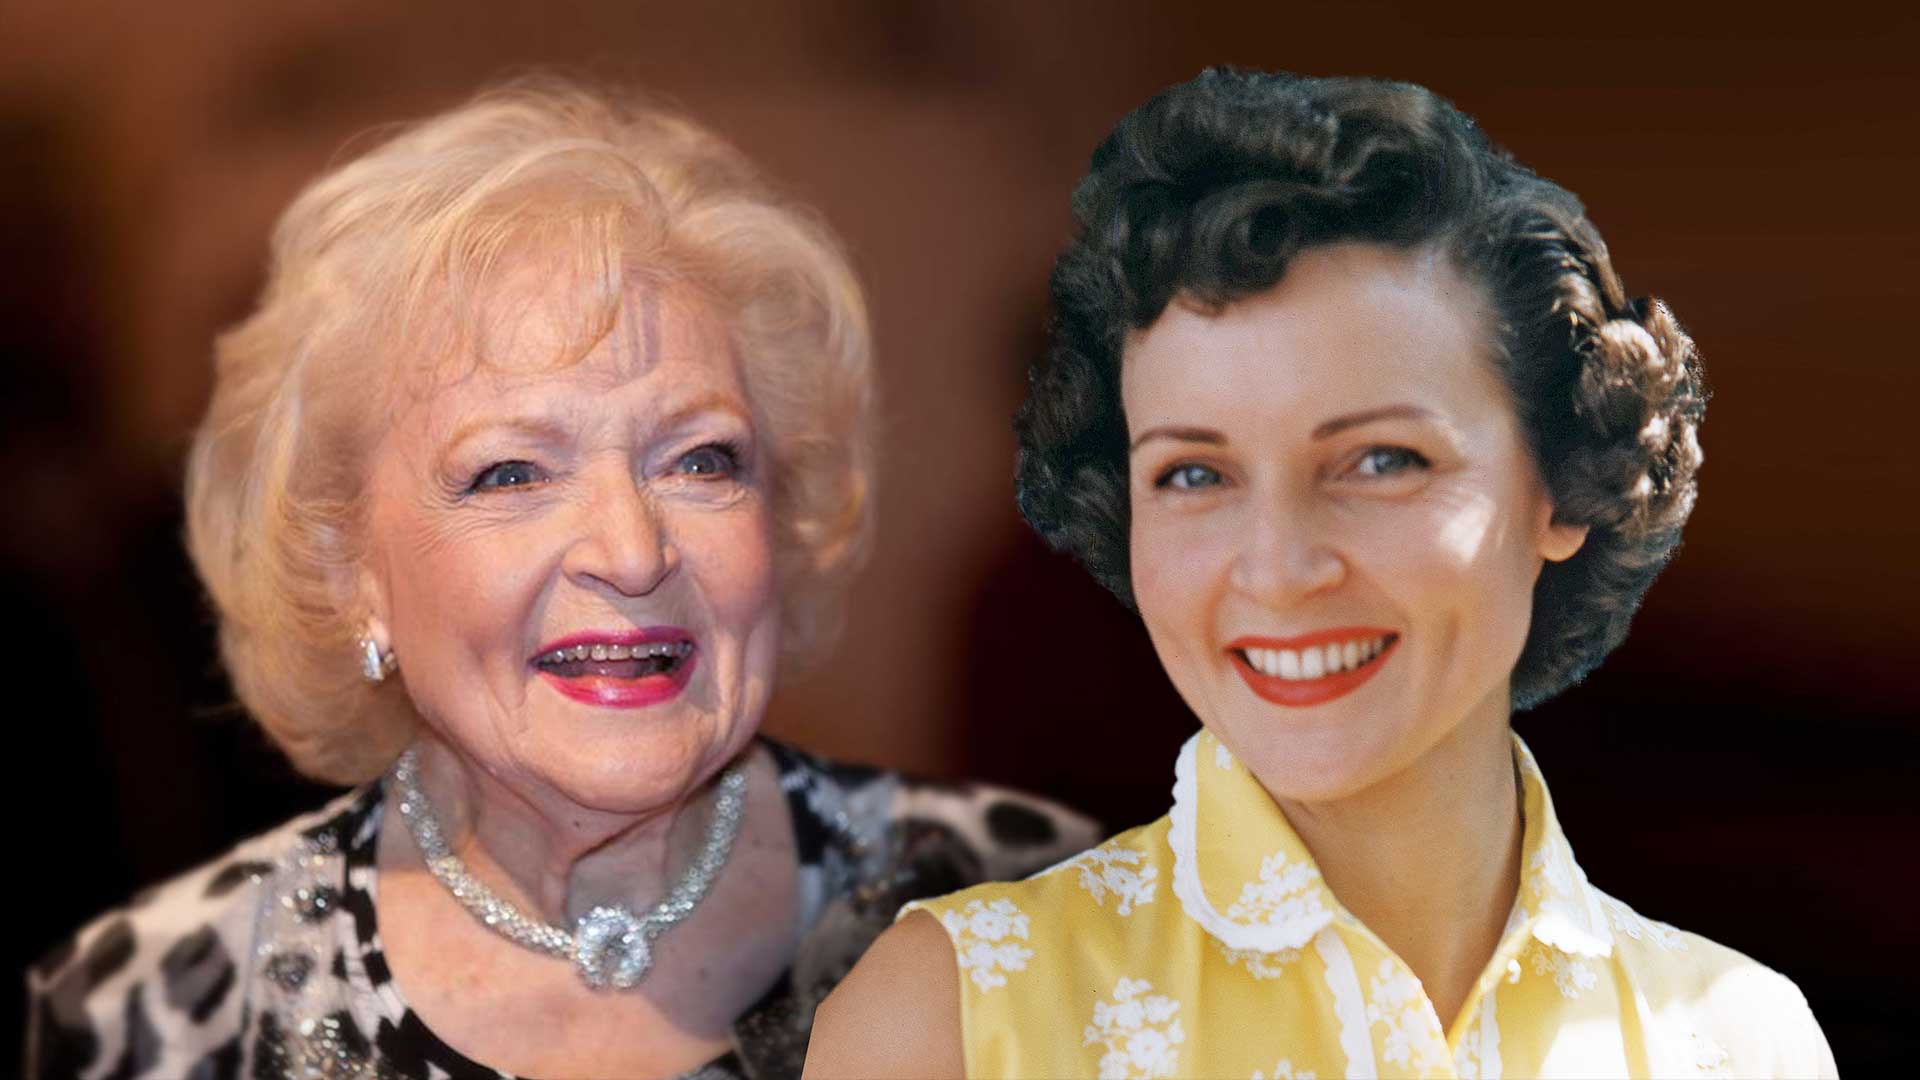 Composite of Betty White recently and in the early 1950s.